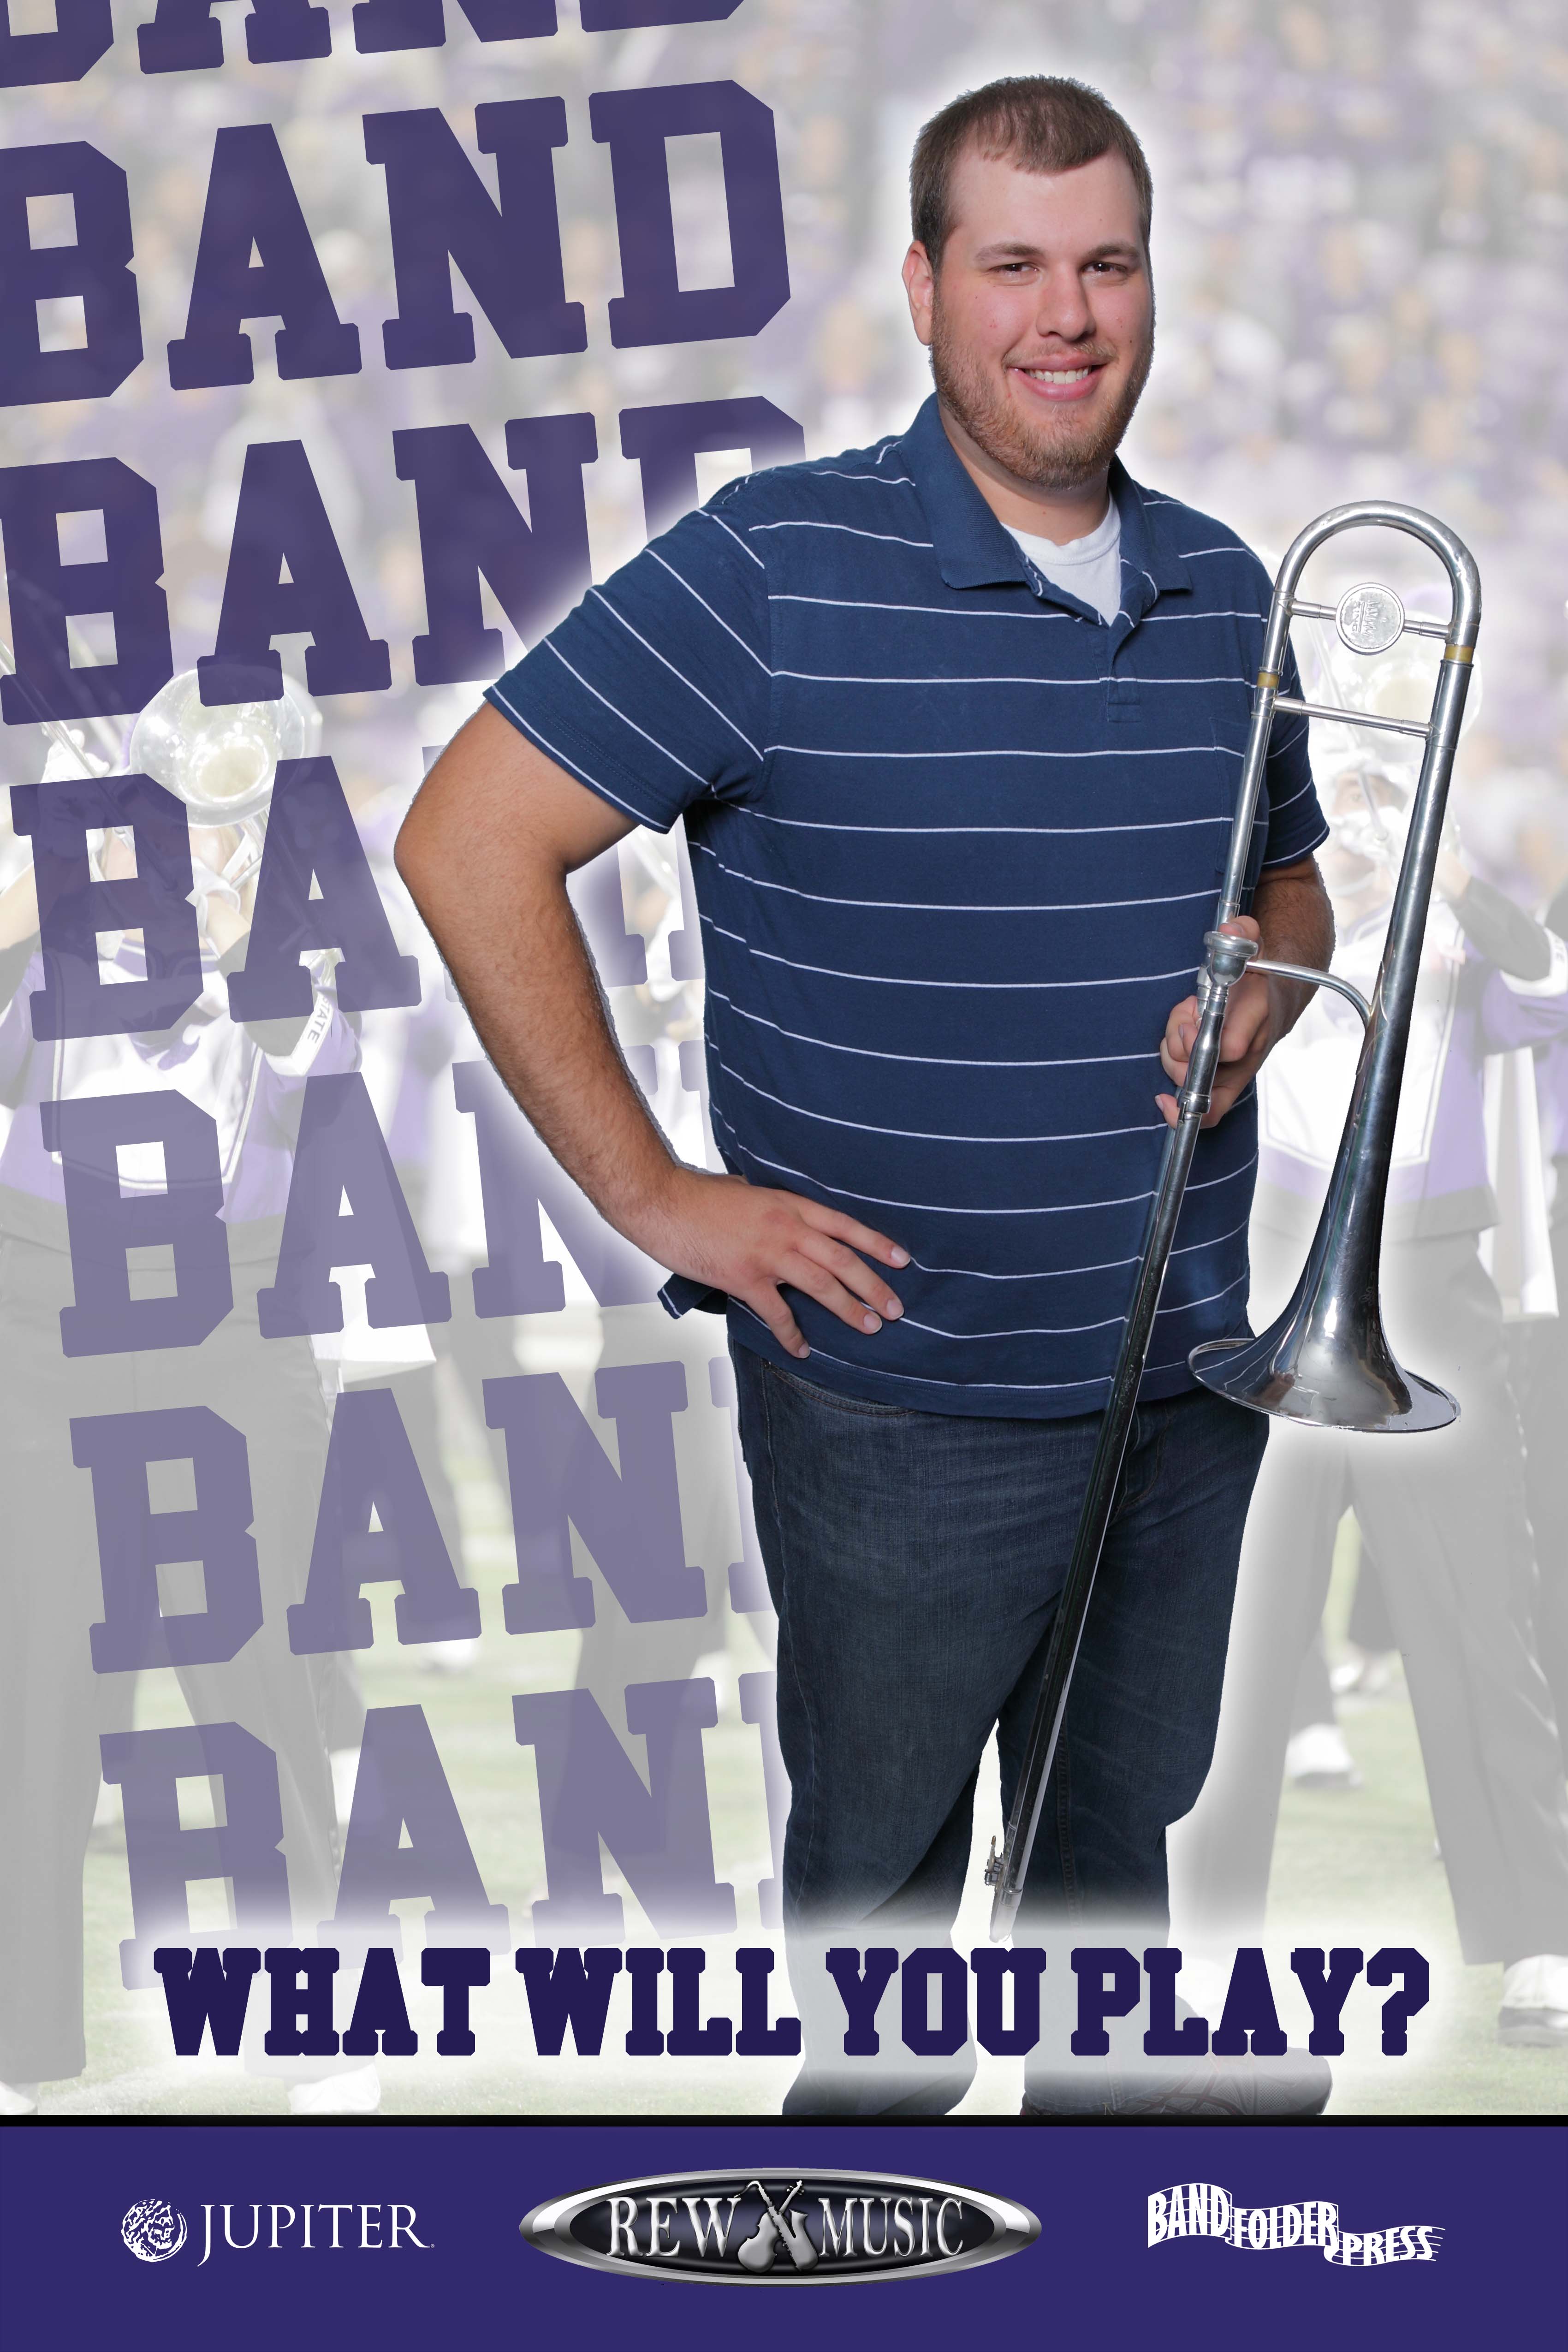 Join the School Band Trombone player